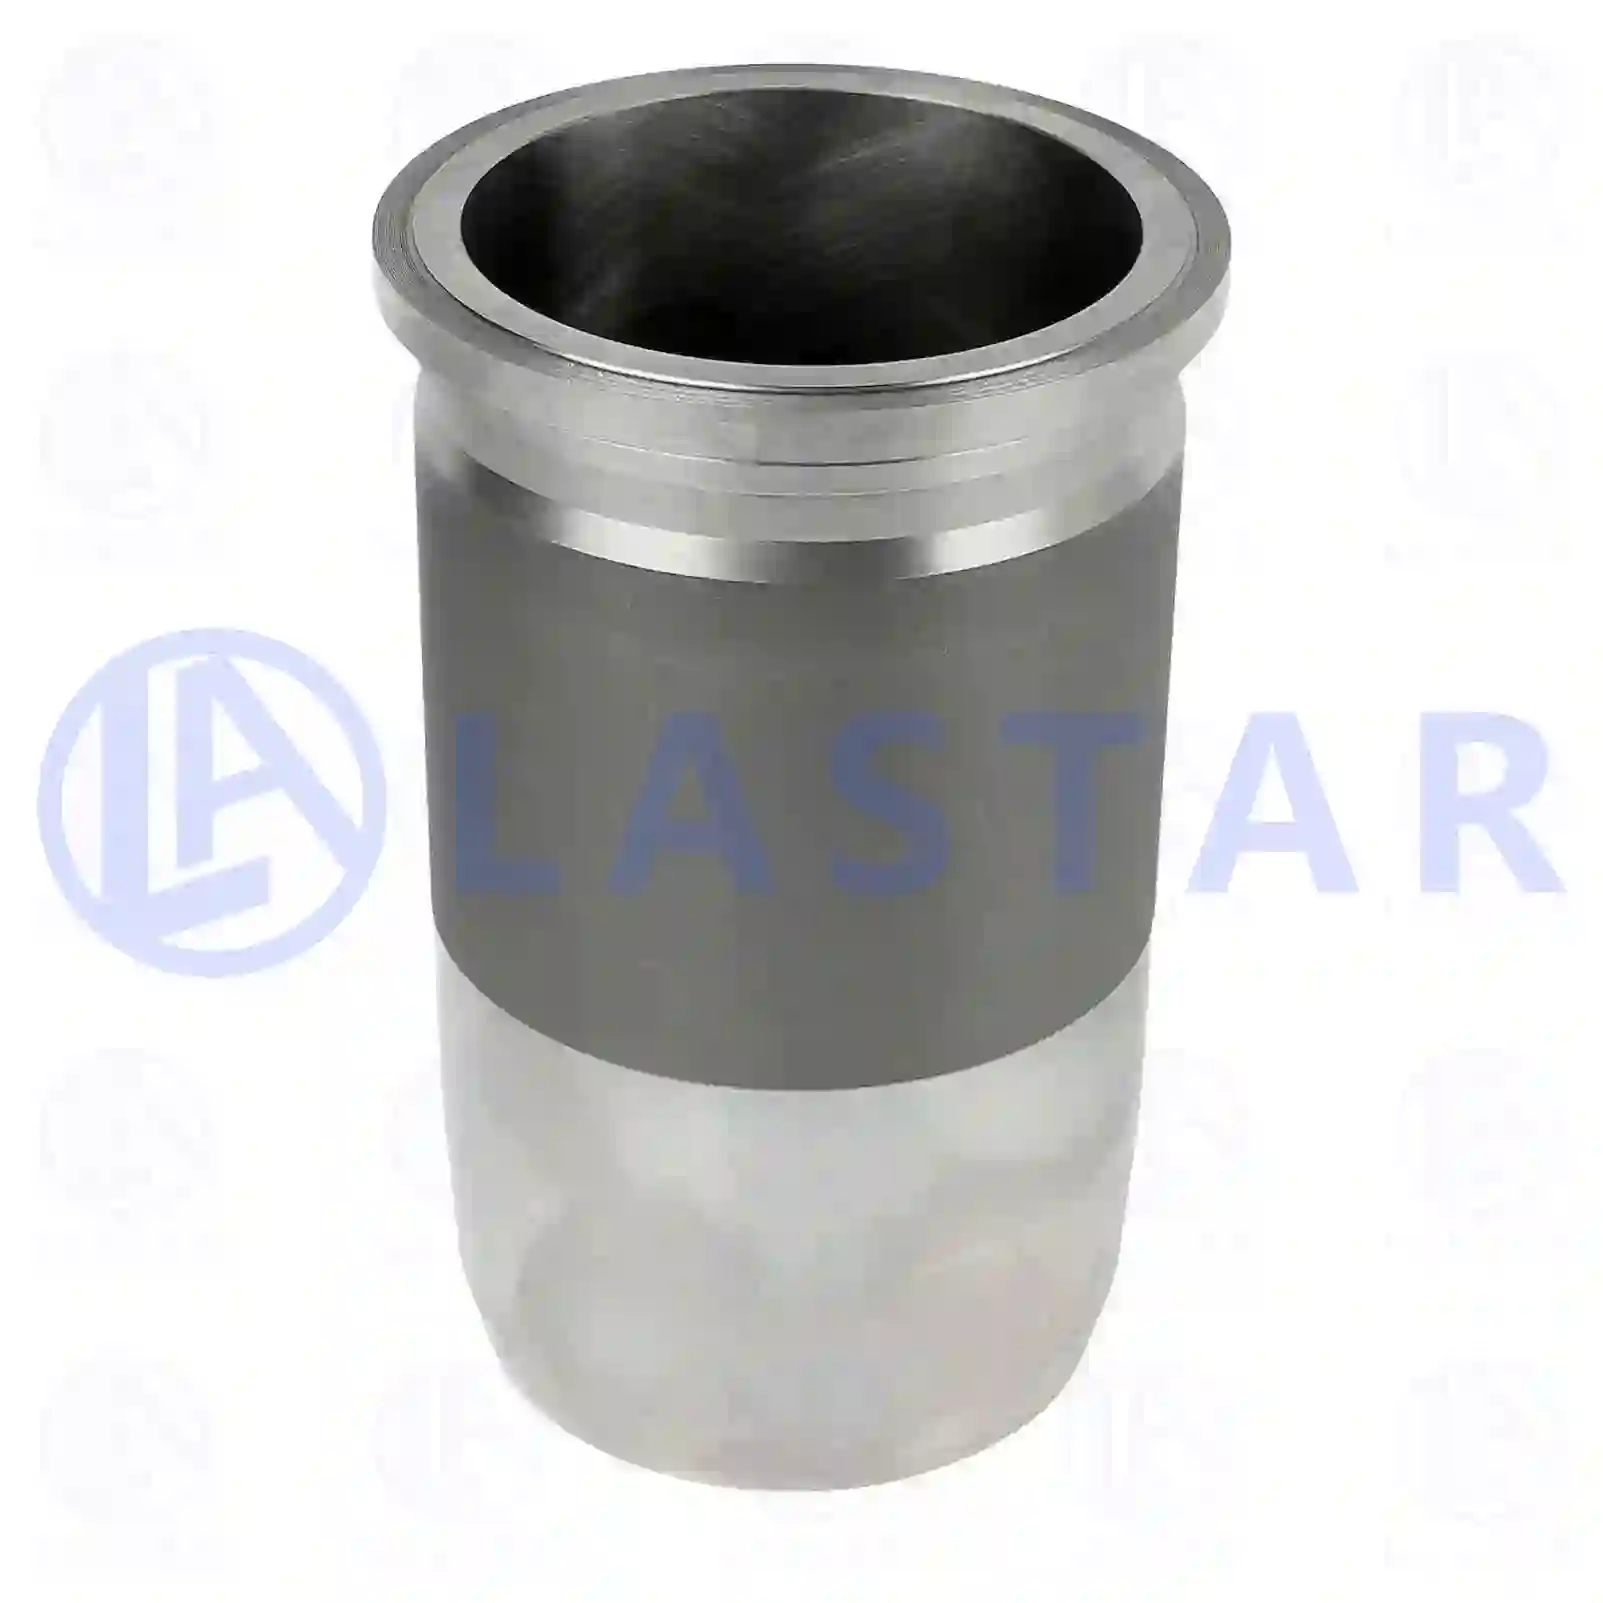 Cylinder liner, without seal rings, 77701978, 5410110510 ||  77701978 Lastar Spare Part | Truck Spare Parts, Auotomotive Spare Parts Cylinder liner, without seal rings, 77701978, 5410110510 ||  77701978 Lastar Spare Part | Truck Spare Parts, Auotomotive Spare Parts